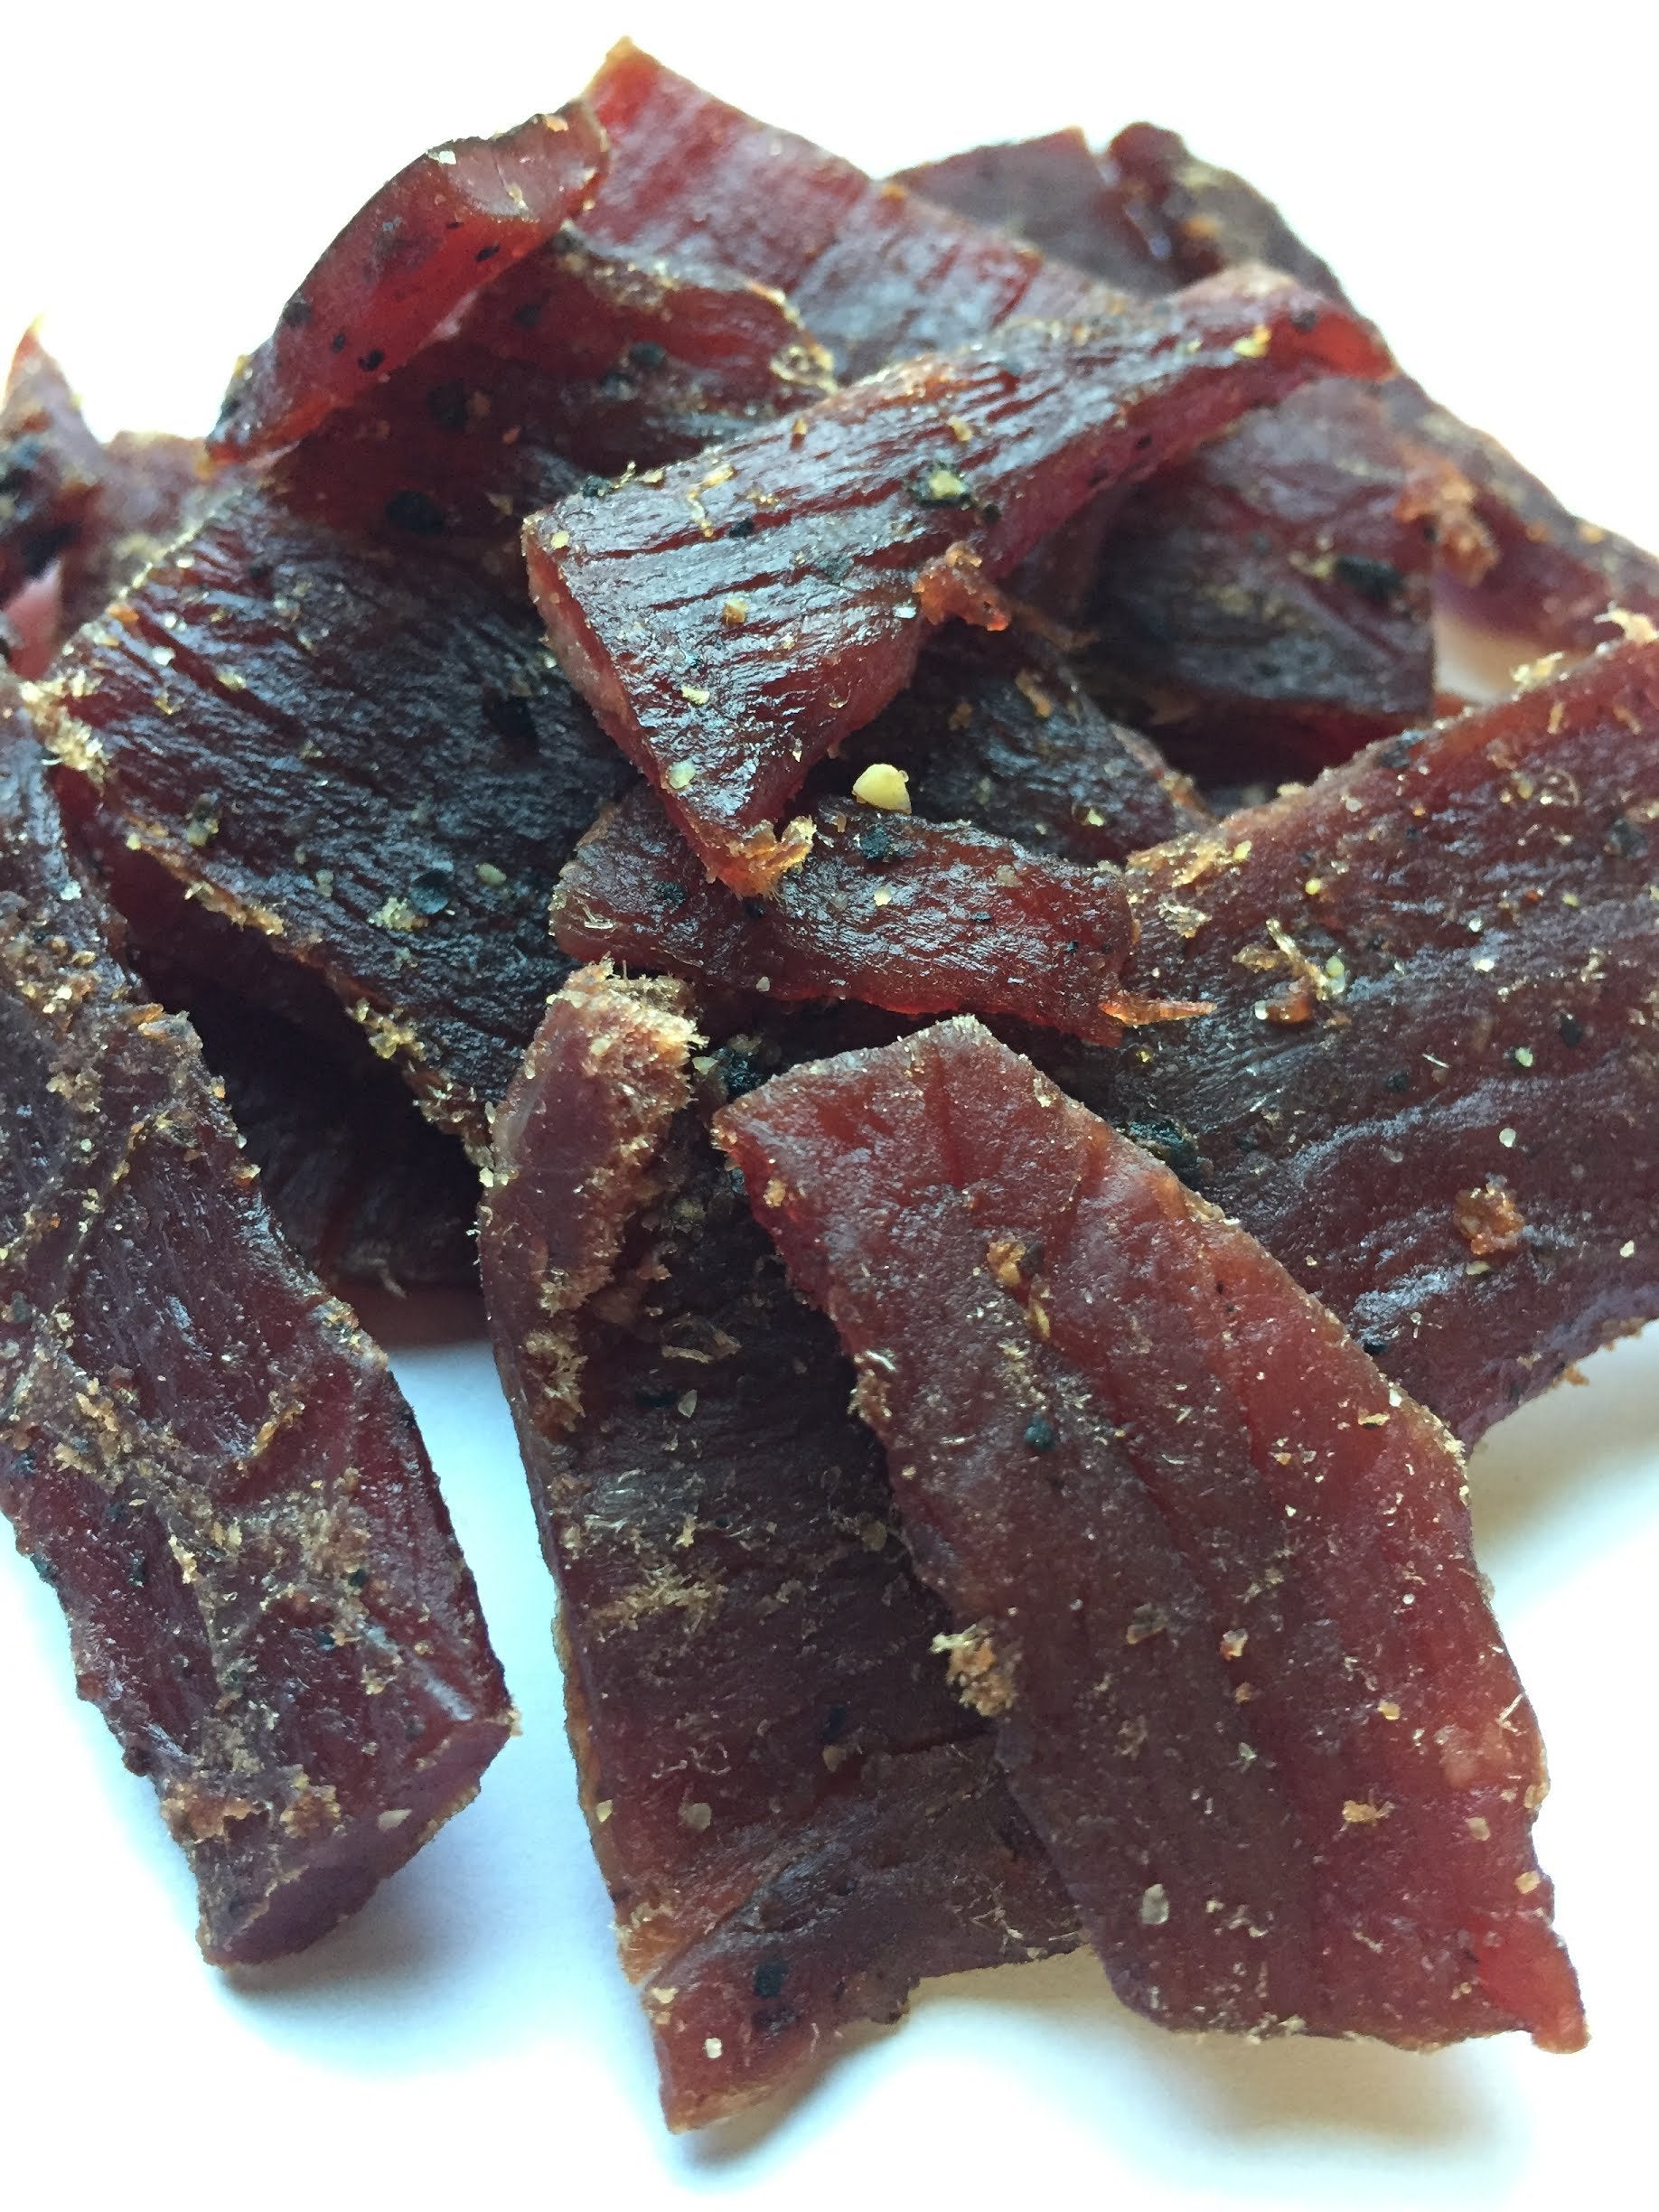 Soft and Tender Style Beef Jerky - Honey Pepper - 1 Pound Bag by Bricktown Jerky